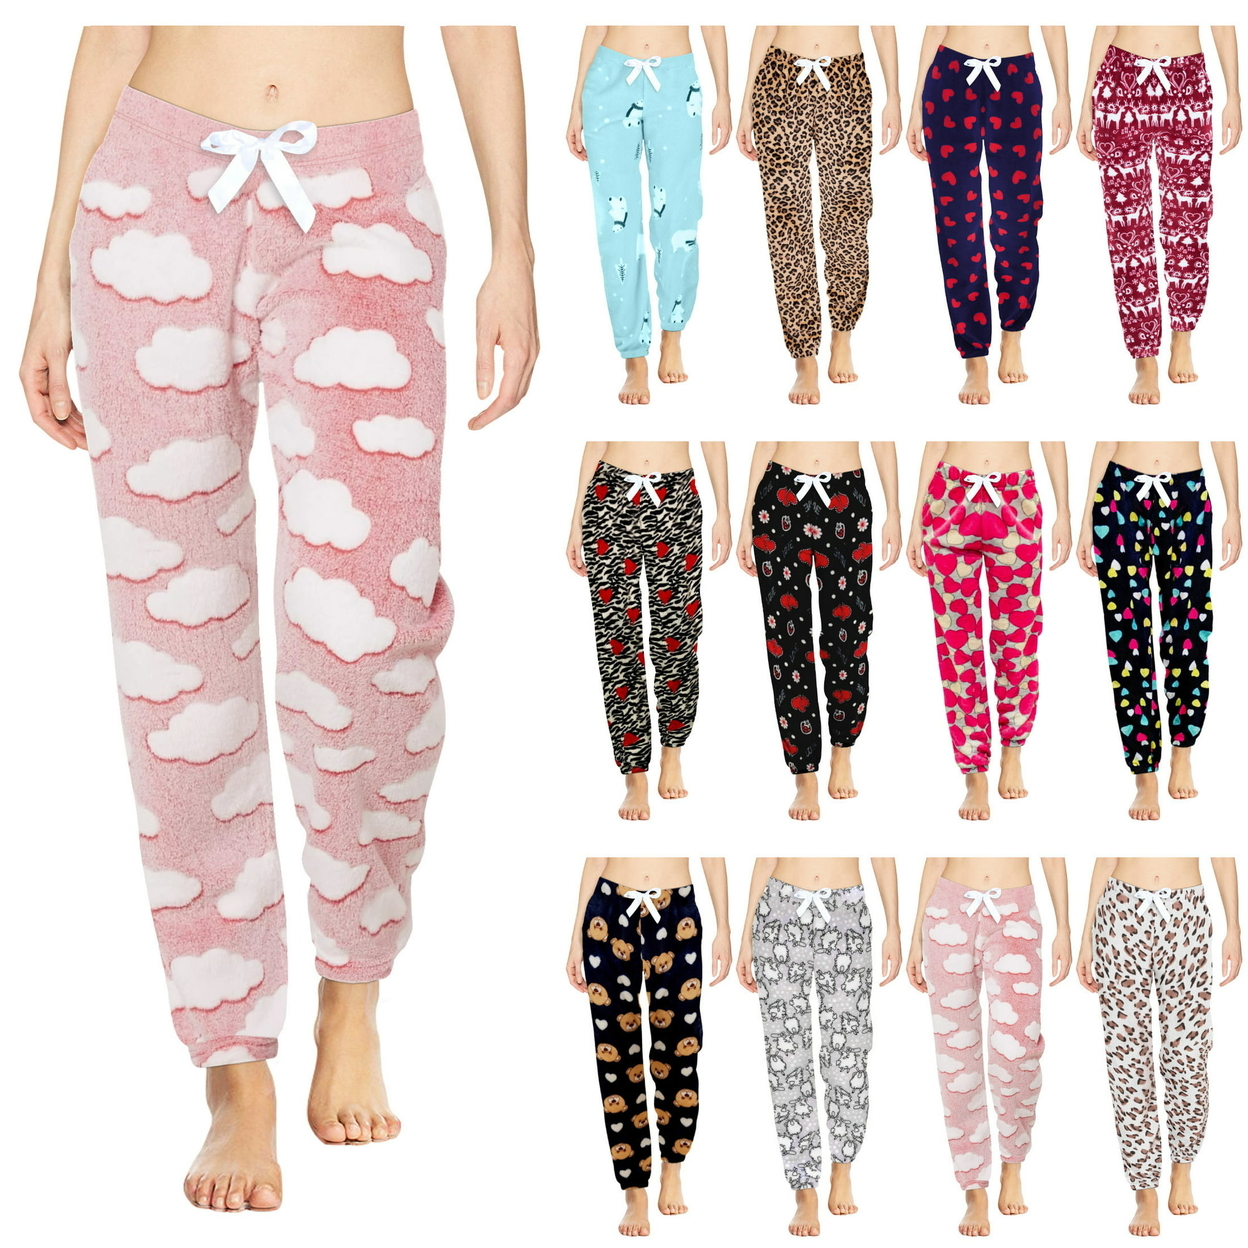 3-Pack: Women's Solid & Printed Ultra-Soft Comfy Stretch Micro-Fleece Pajama Lounge Pants - Small, Love